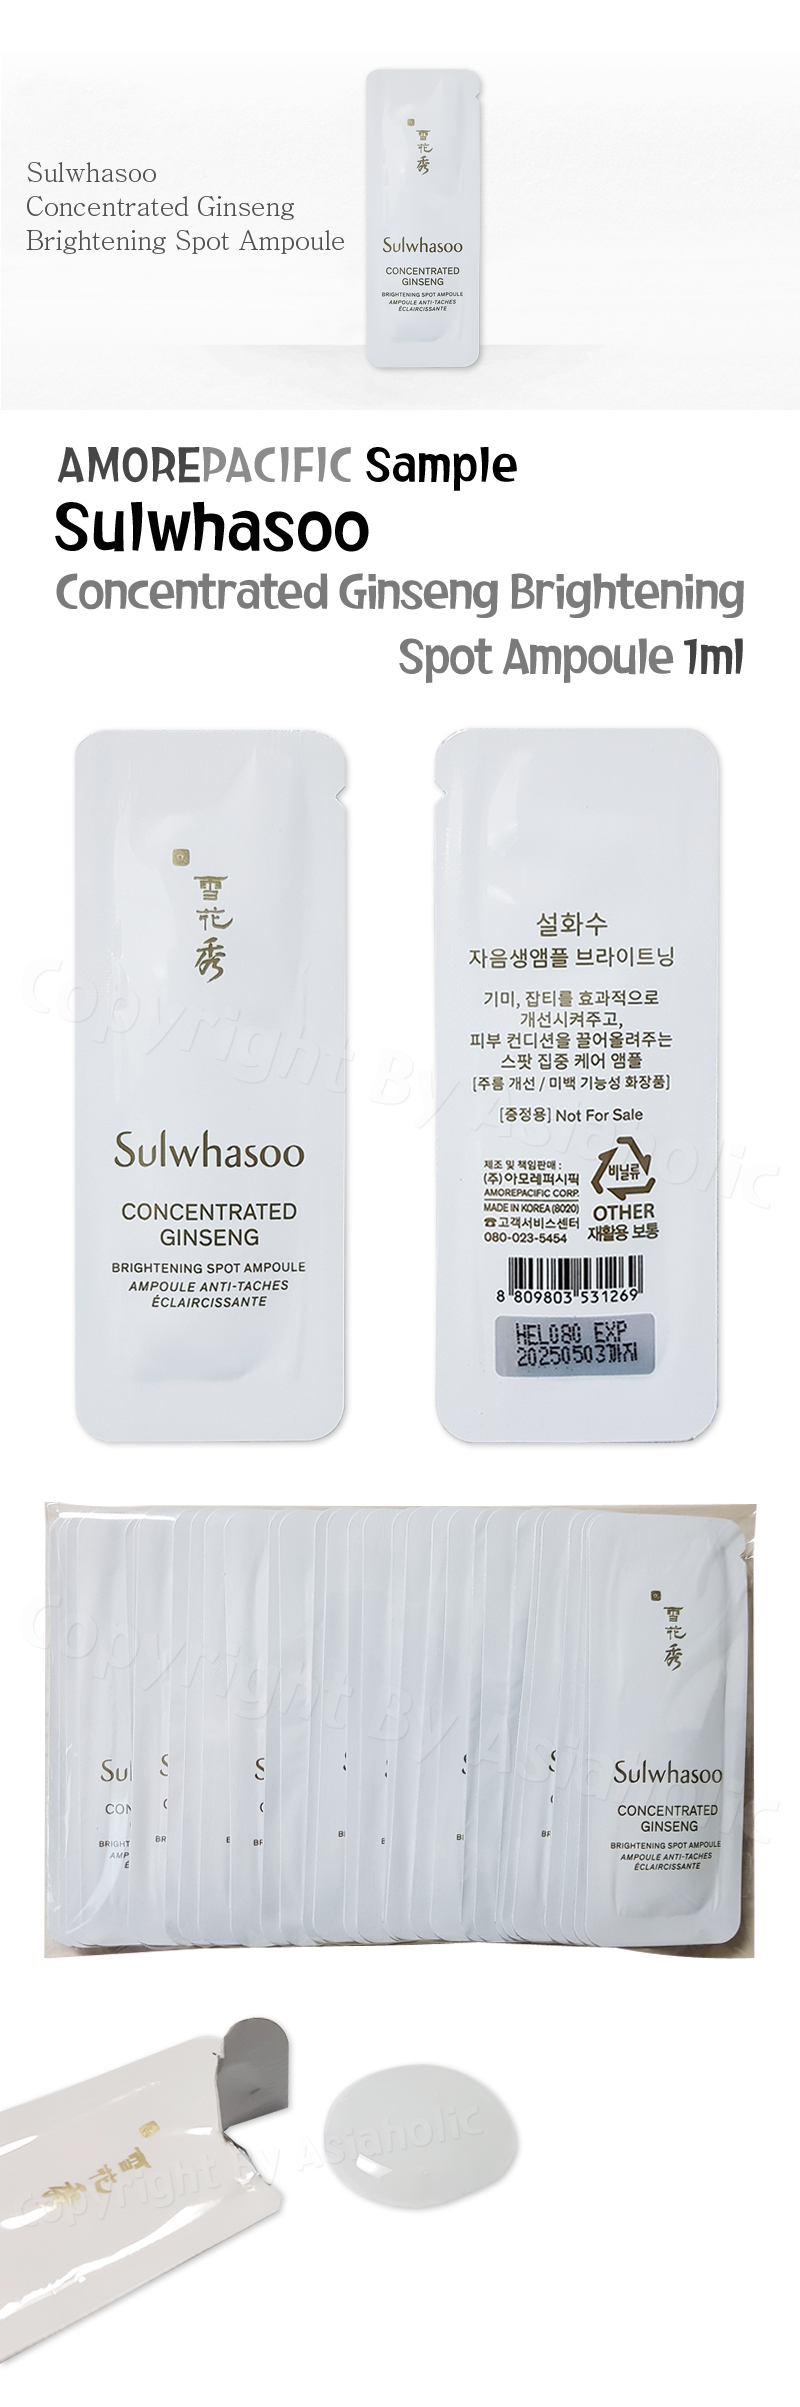 Sulwhasoo Concentrated Ginseng Brightening Spot Ampoule 1ml x 10pcs (10ml) Newest Version